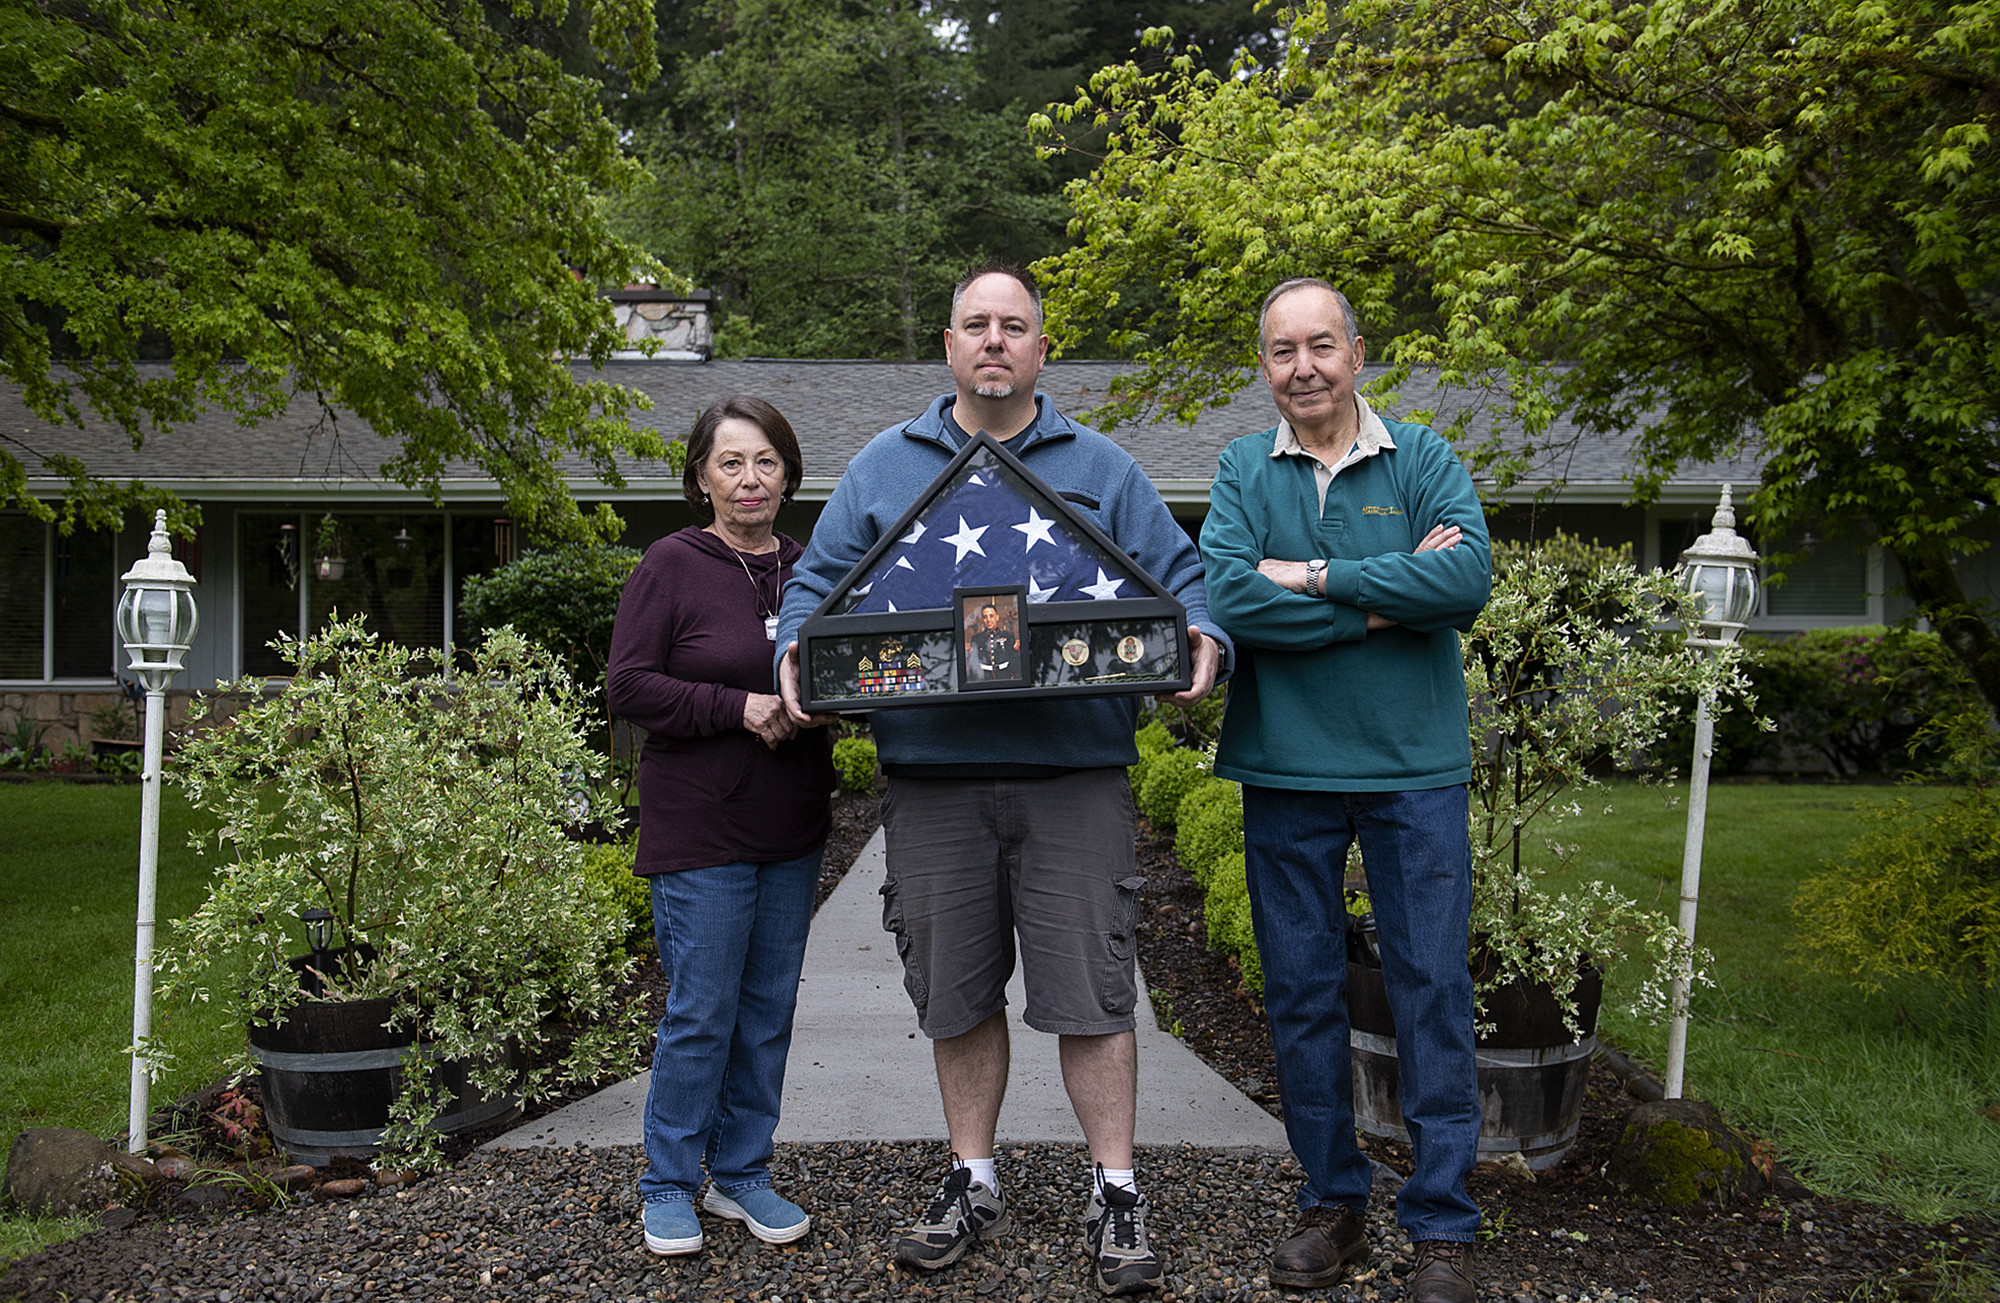 Janie Peto, from left, honors her son, U.S. Marine Corps Sgt. Jason Peto, while joined by one of her sons, Garry, and husband, Ernest, at their Vancouver home on May 18. Jason Peto died from injuries he sustained in Afghanistan in 2010.